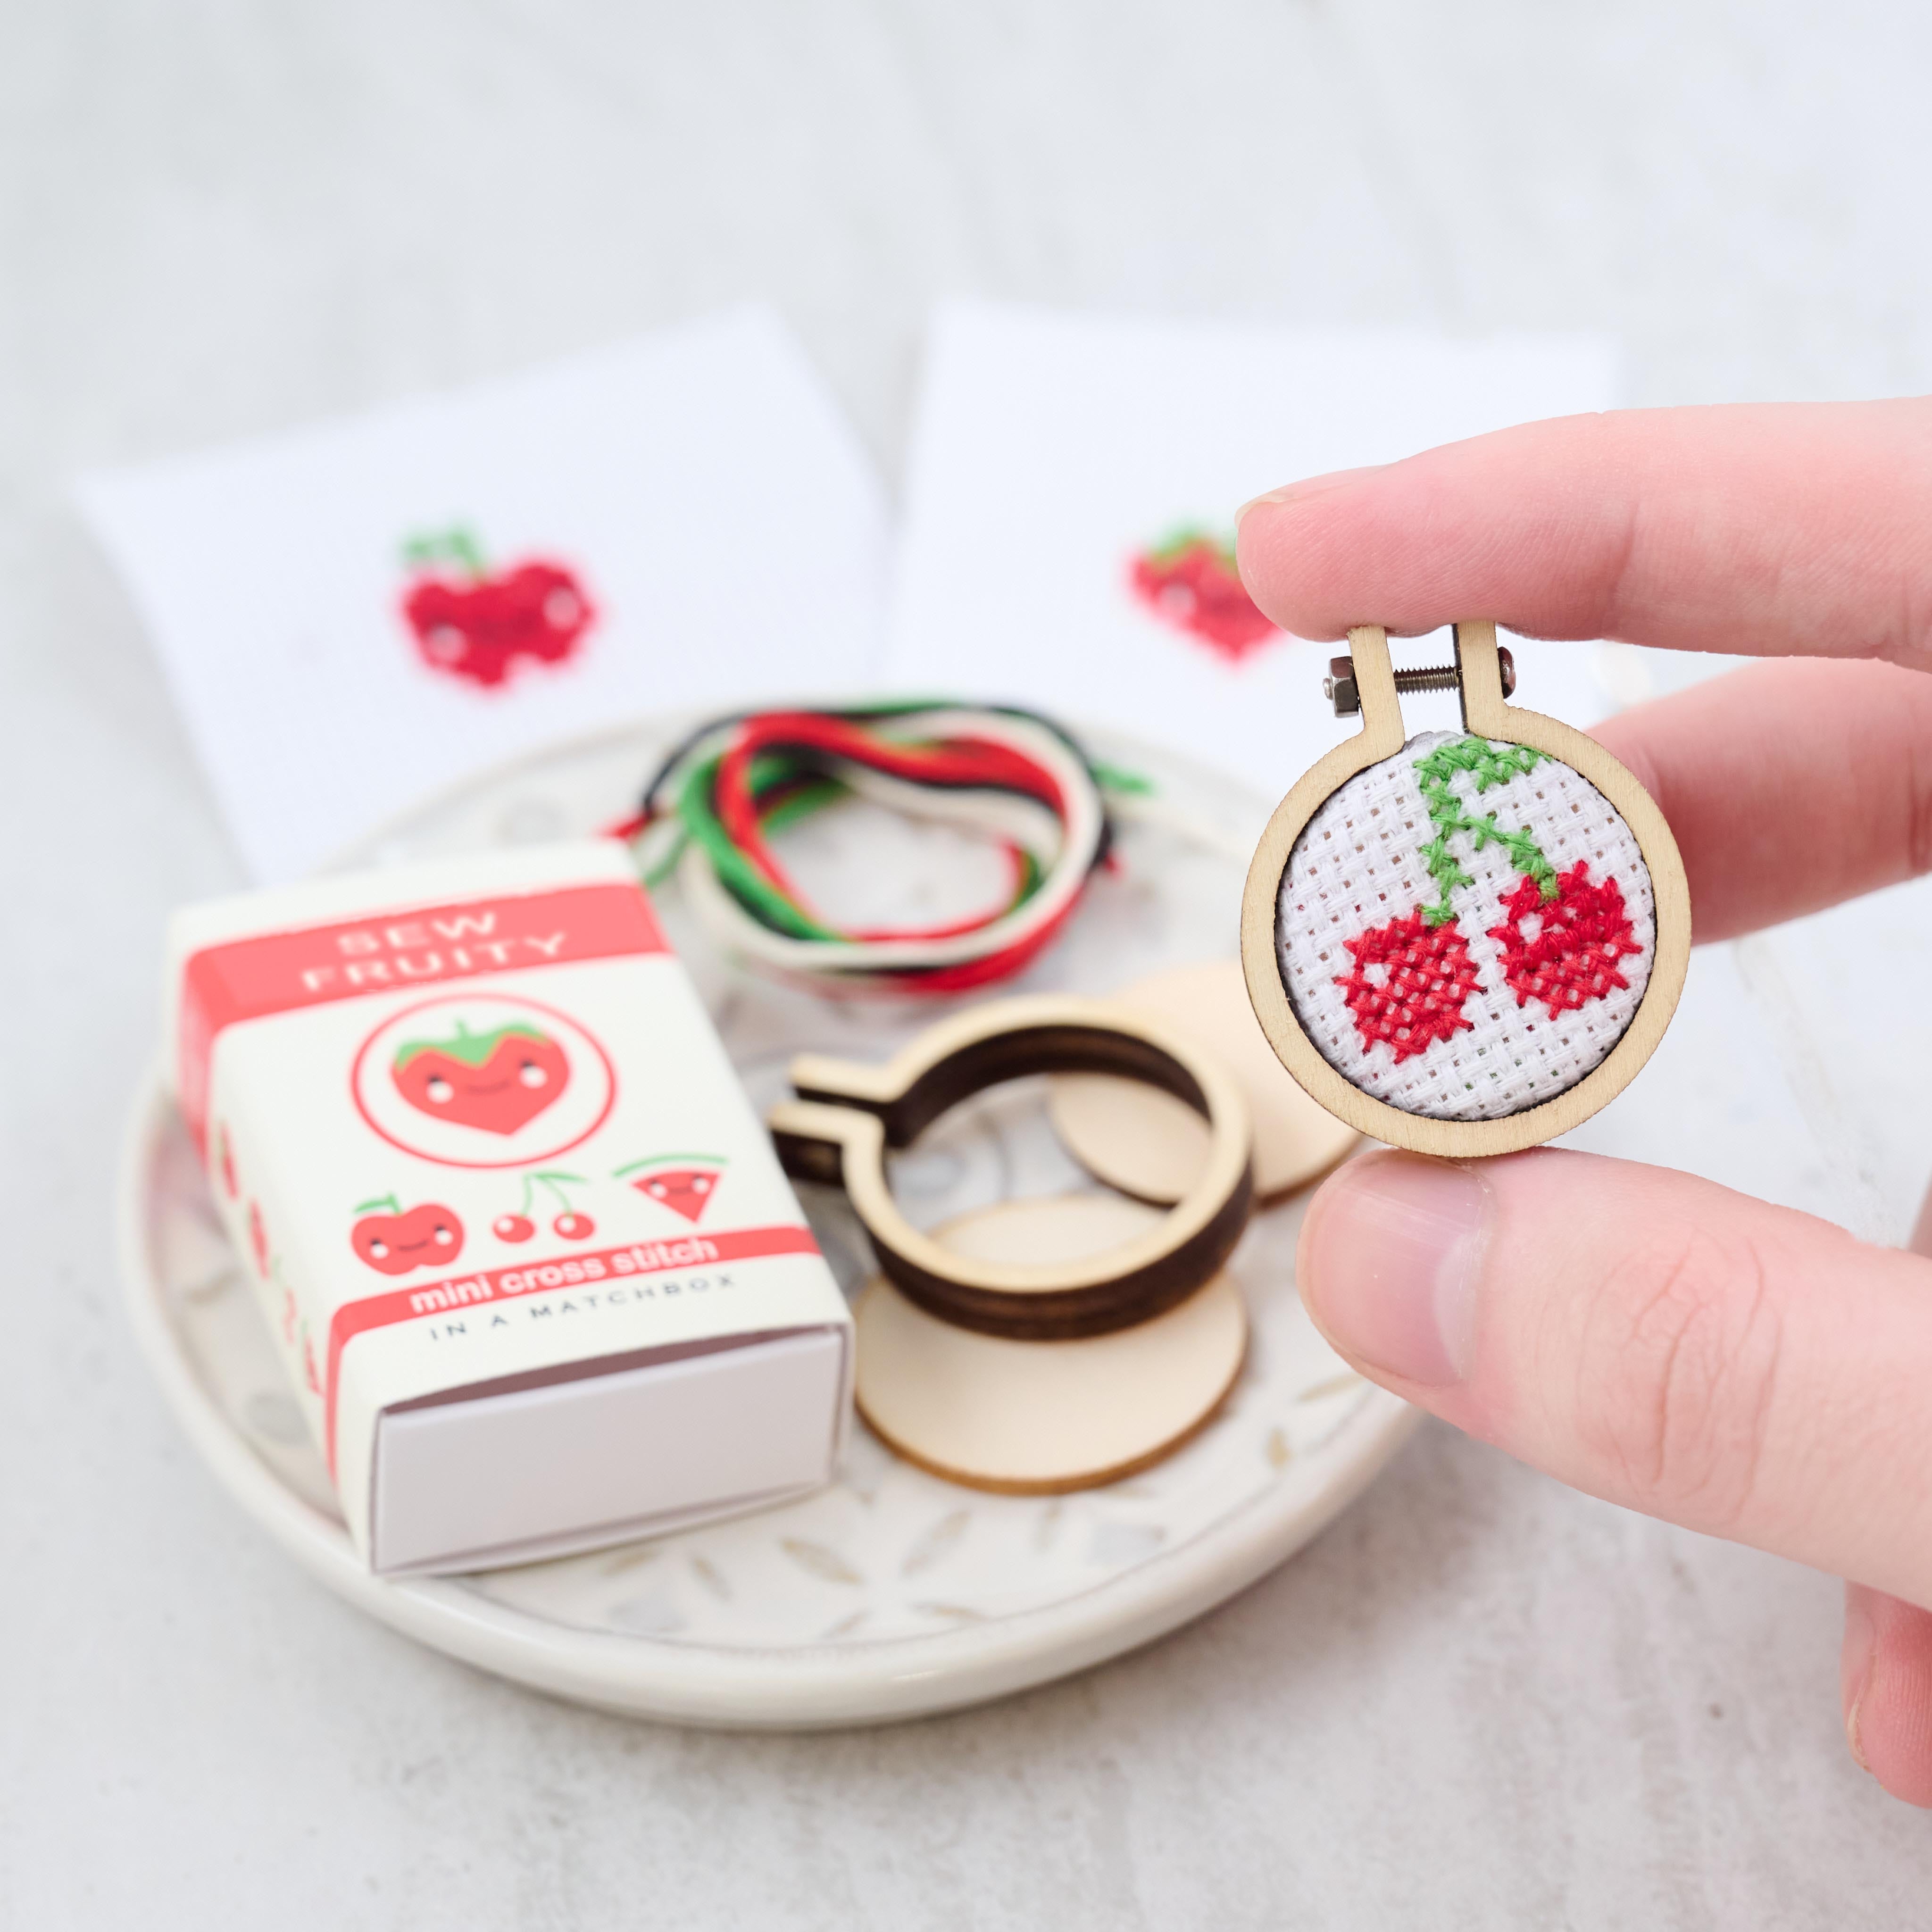 Sew Fruity Mini Cross Stitch Kit With Hoop In A Matchbox